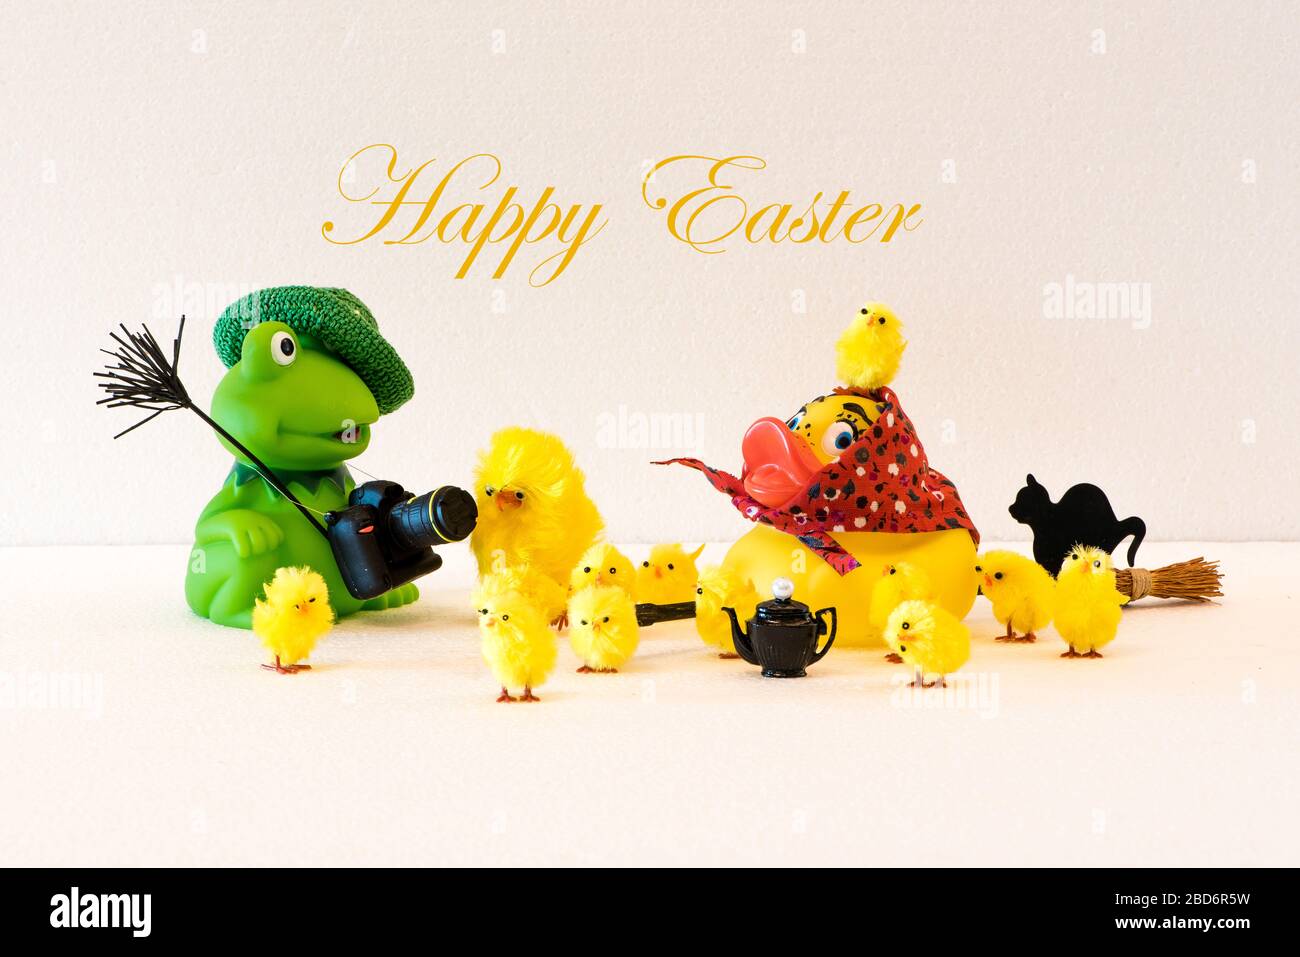 A Happy Easter greeting card with the Easter Duck and Photographer Frog with all their chickens Stock Photo